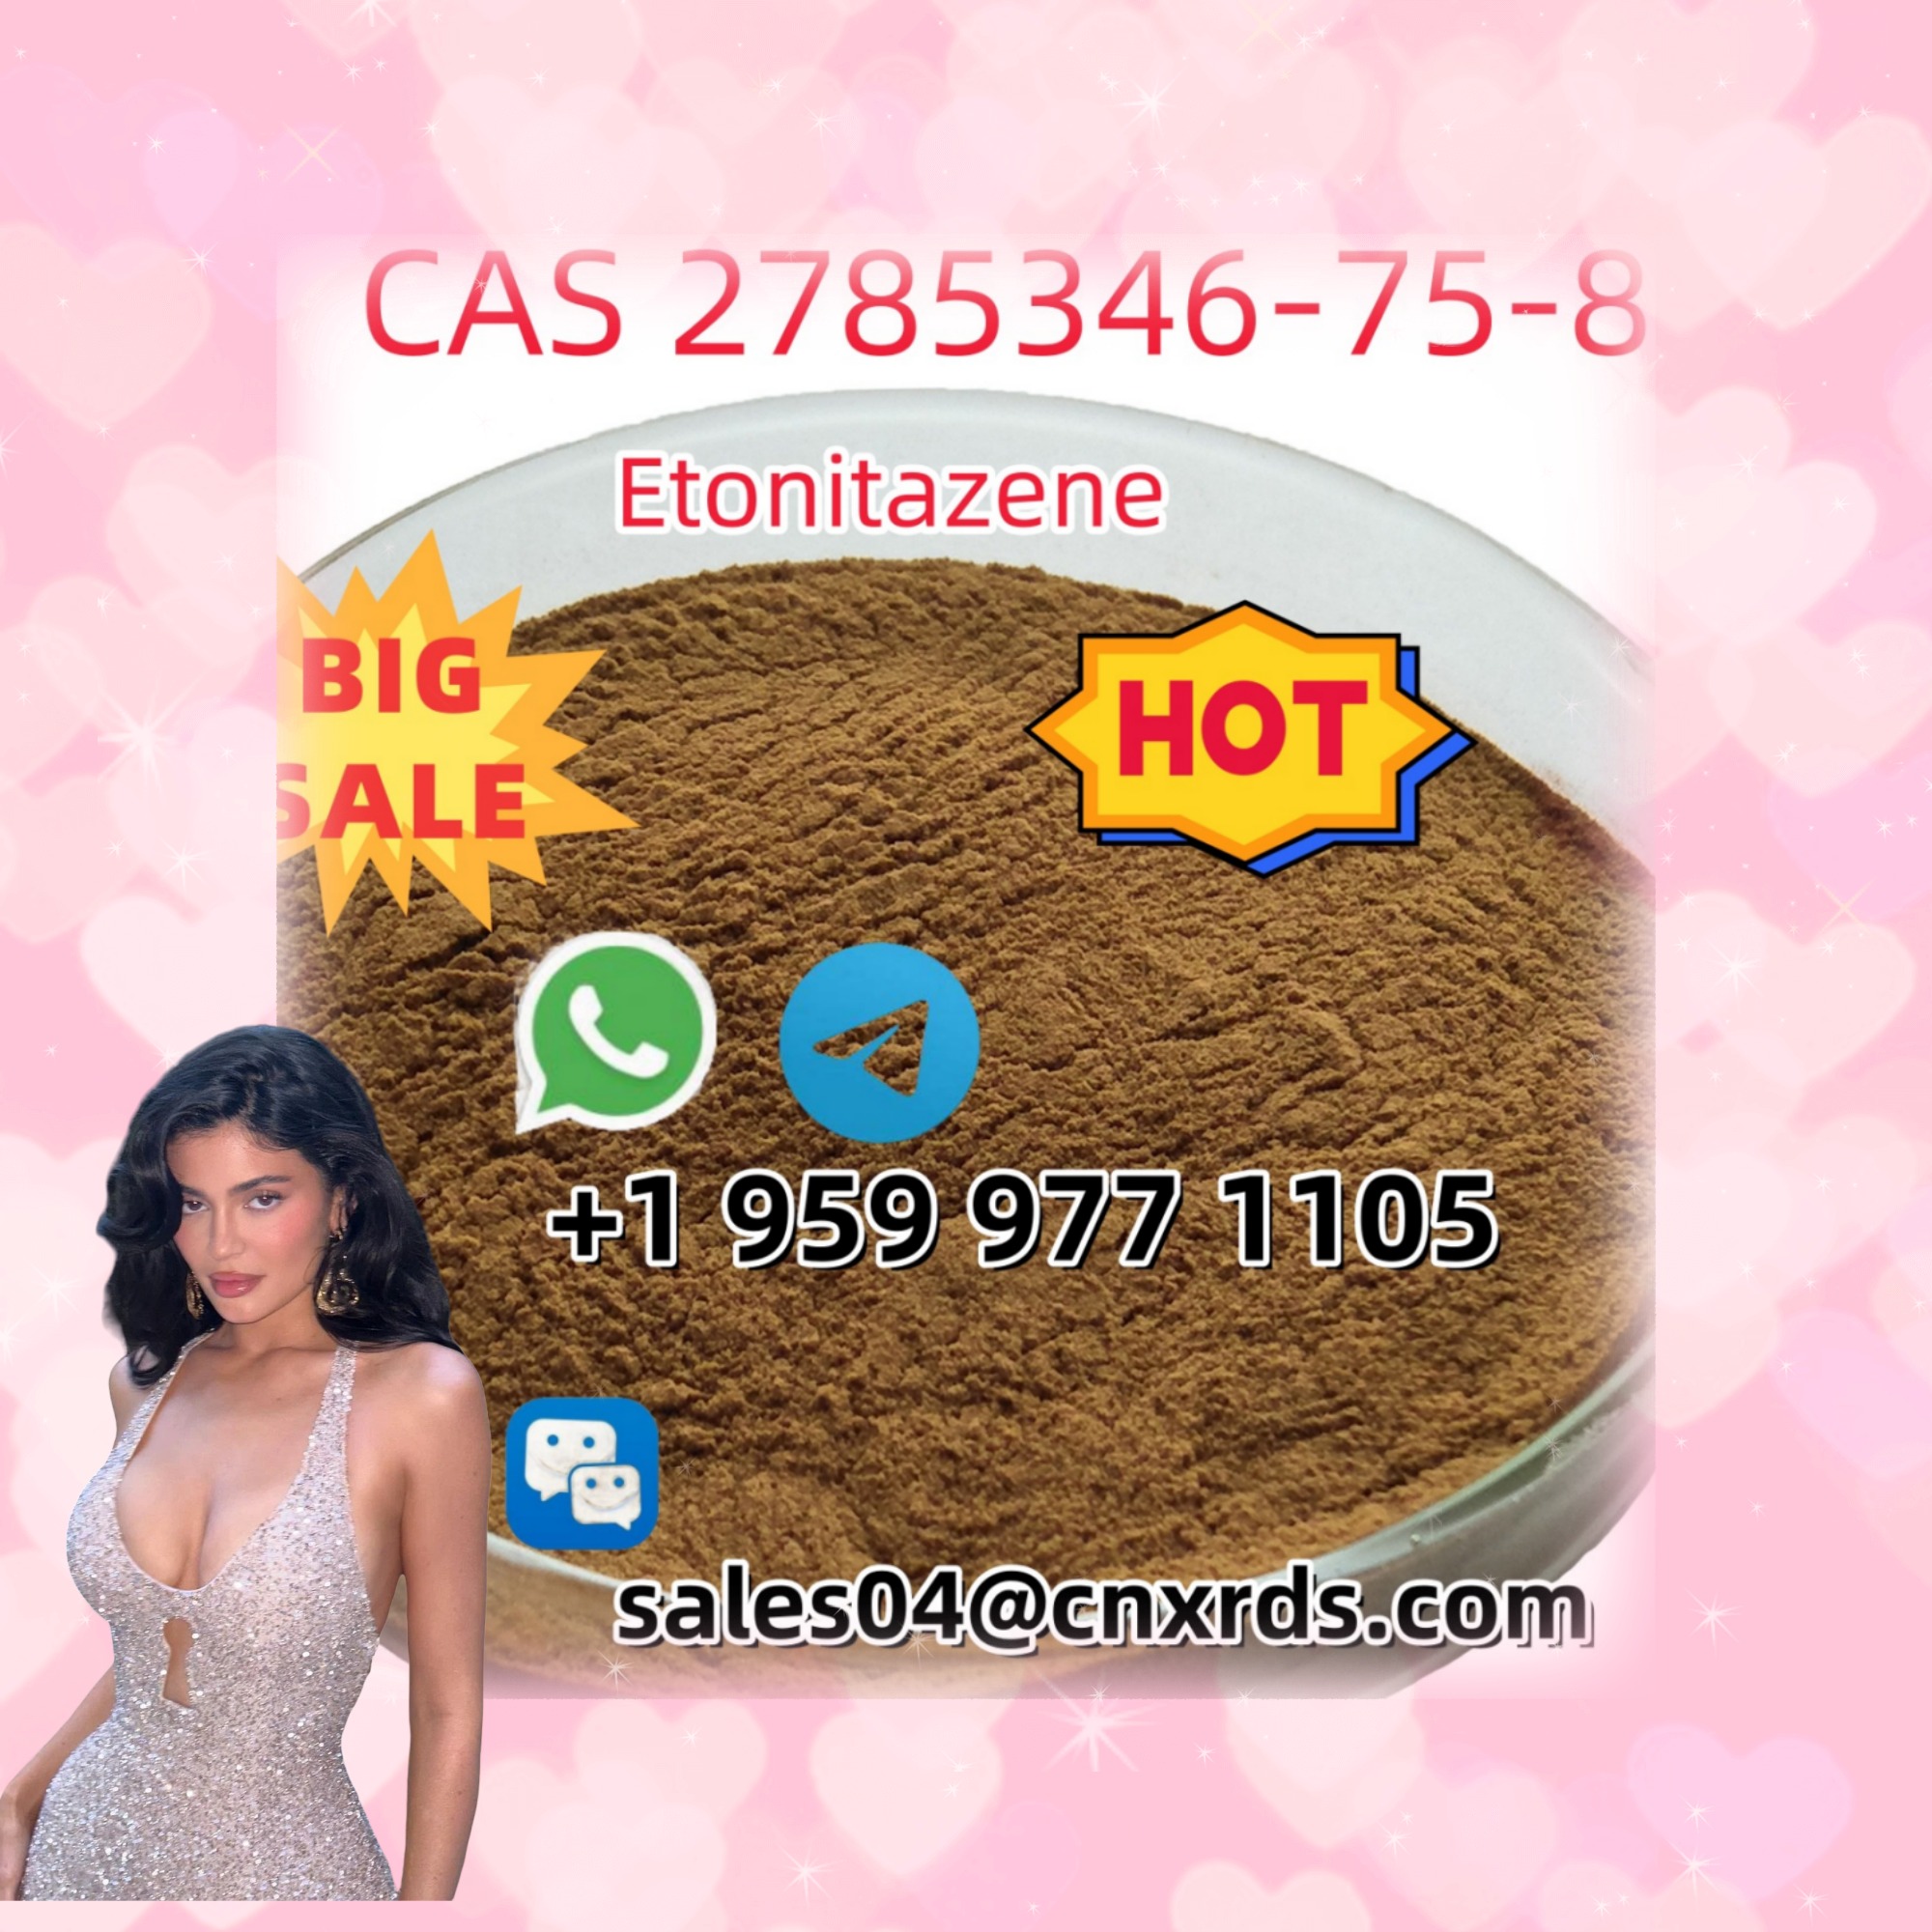 Hot Selling Powder CAS  2785346-75-8 Etonitazene  with 100% Safe and F,aaaaa,Others,Free Classifieds,Post Free Ads,77traders.com